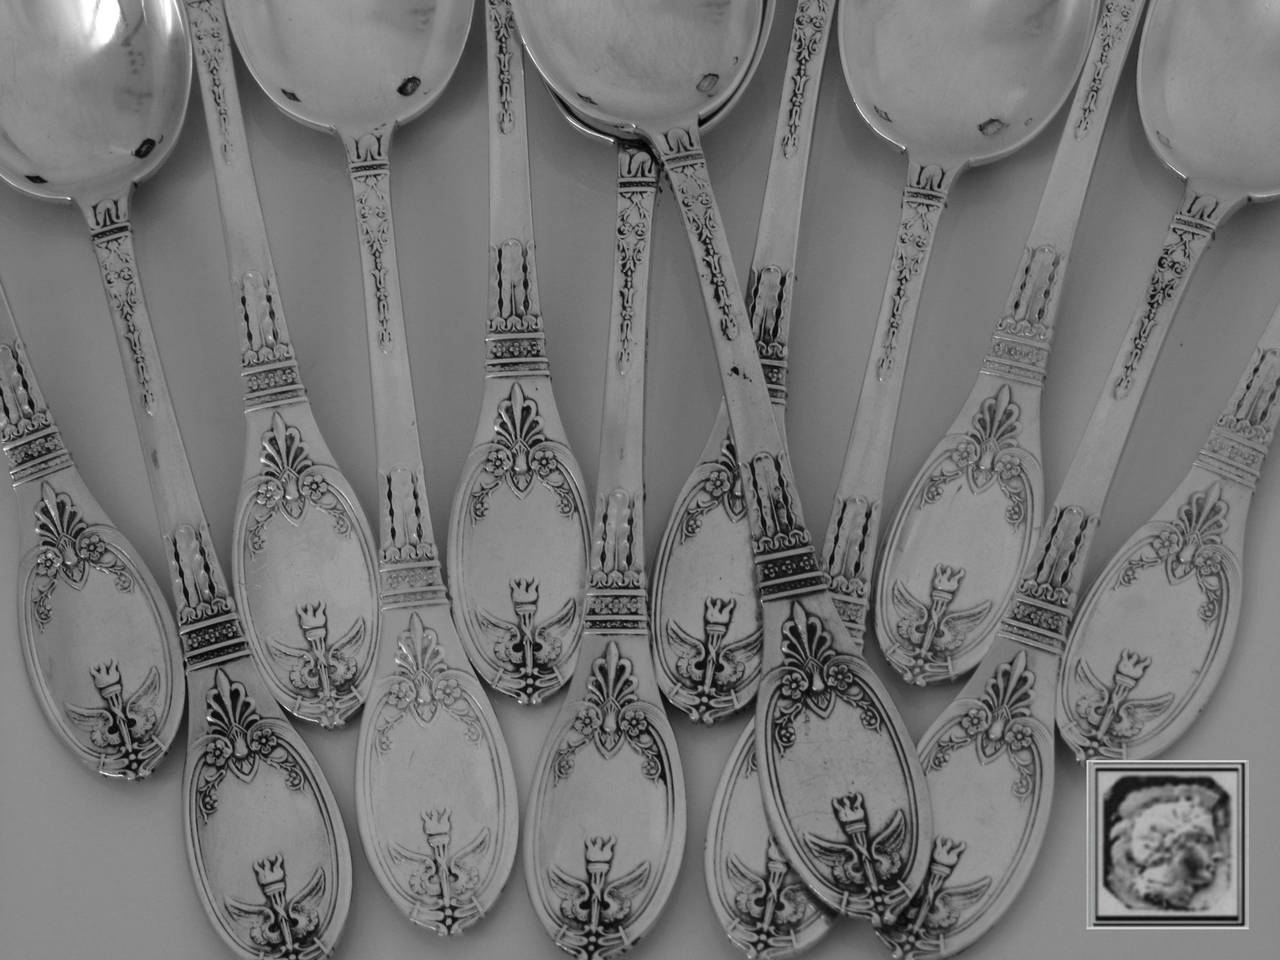 LAPPARRA French Sterling Silver Tea/Coffee Spoons Set 12 pc w/box Empire

A rare set with torches, swans wings, palmettes, laurel wreath and flowers decoration. This model is called 